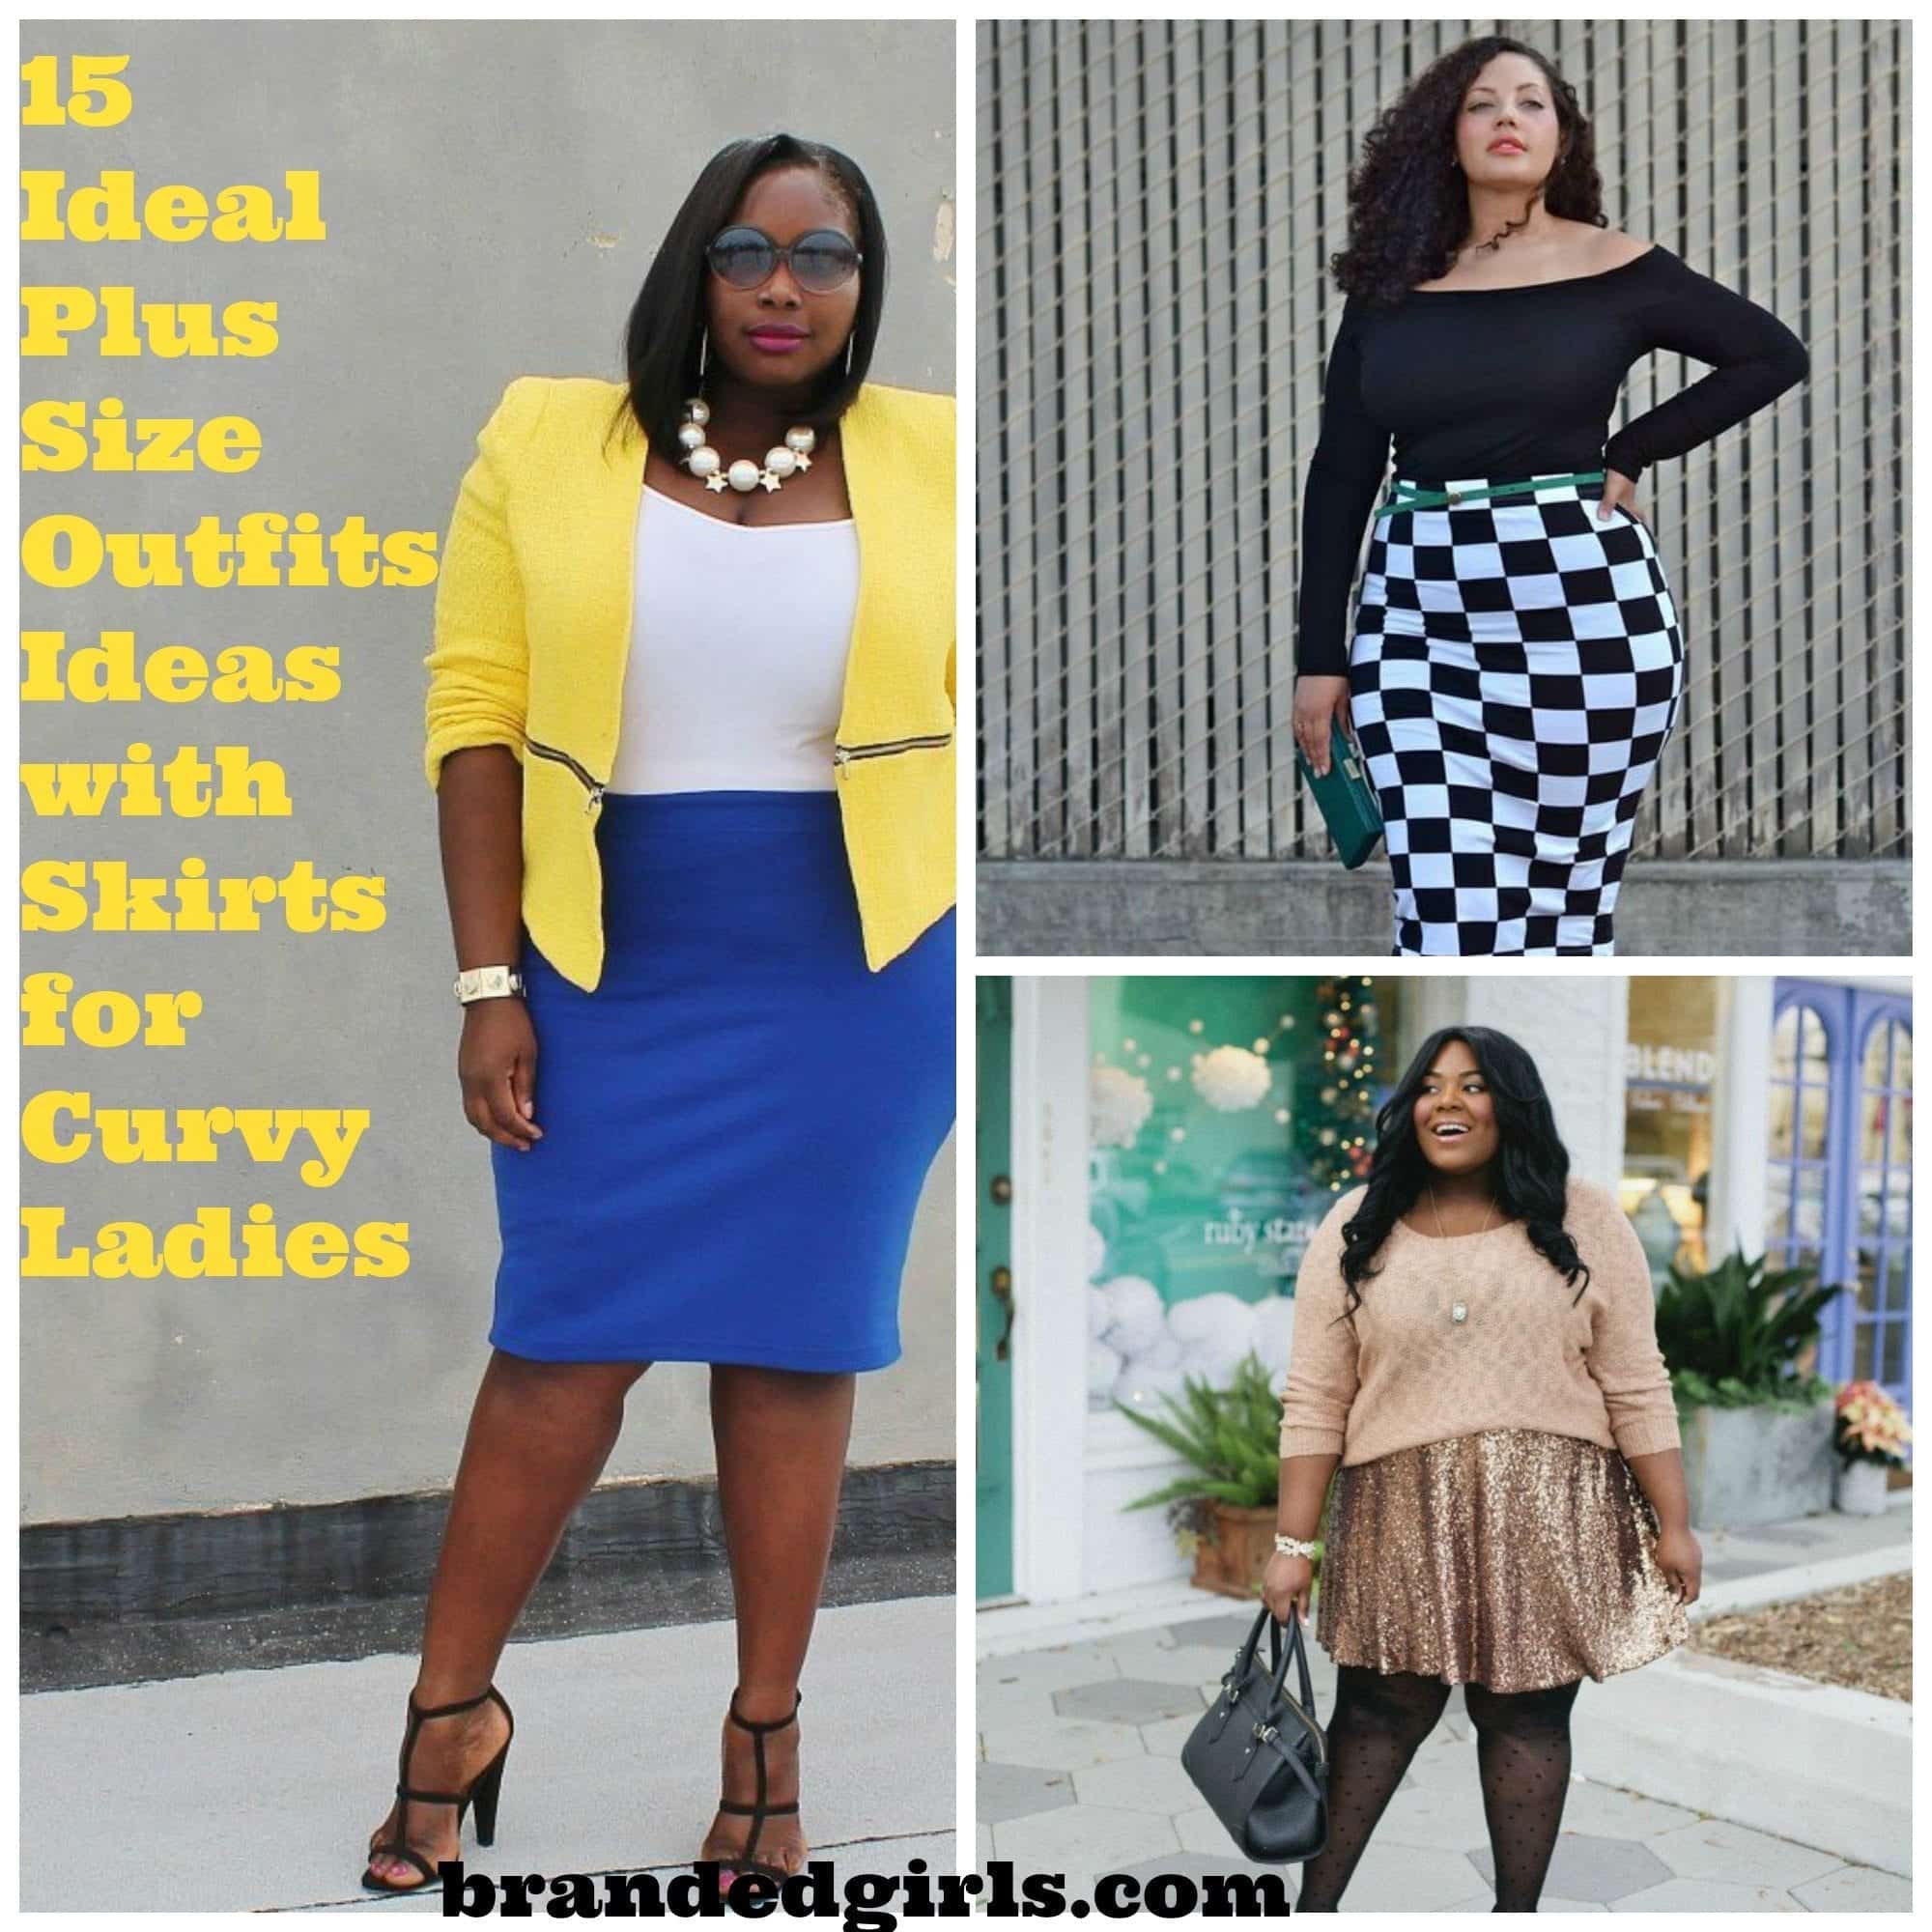 15 Ideal Plus Size Outfits Ideas with Skirts for Curvy Ladies